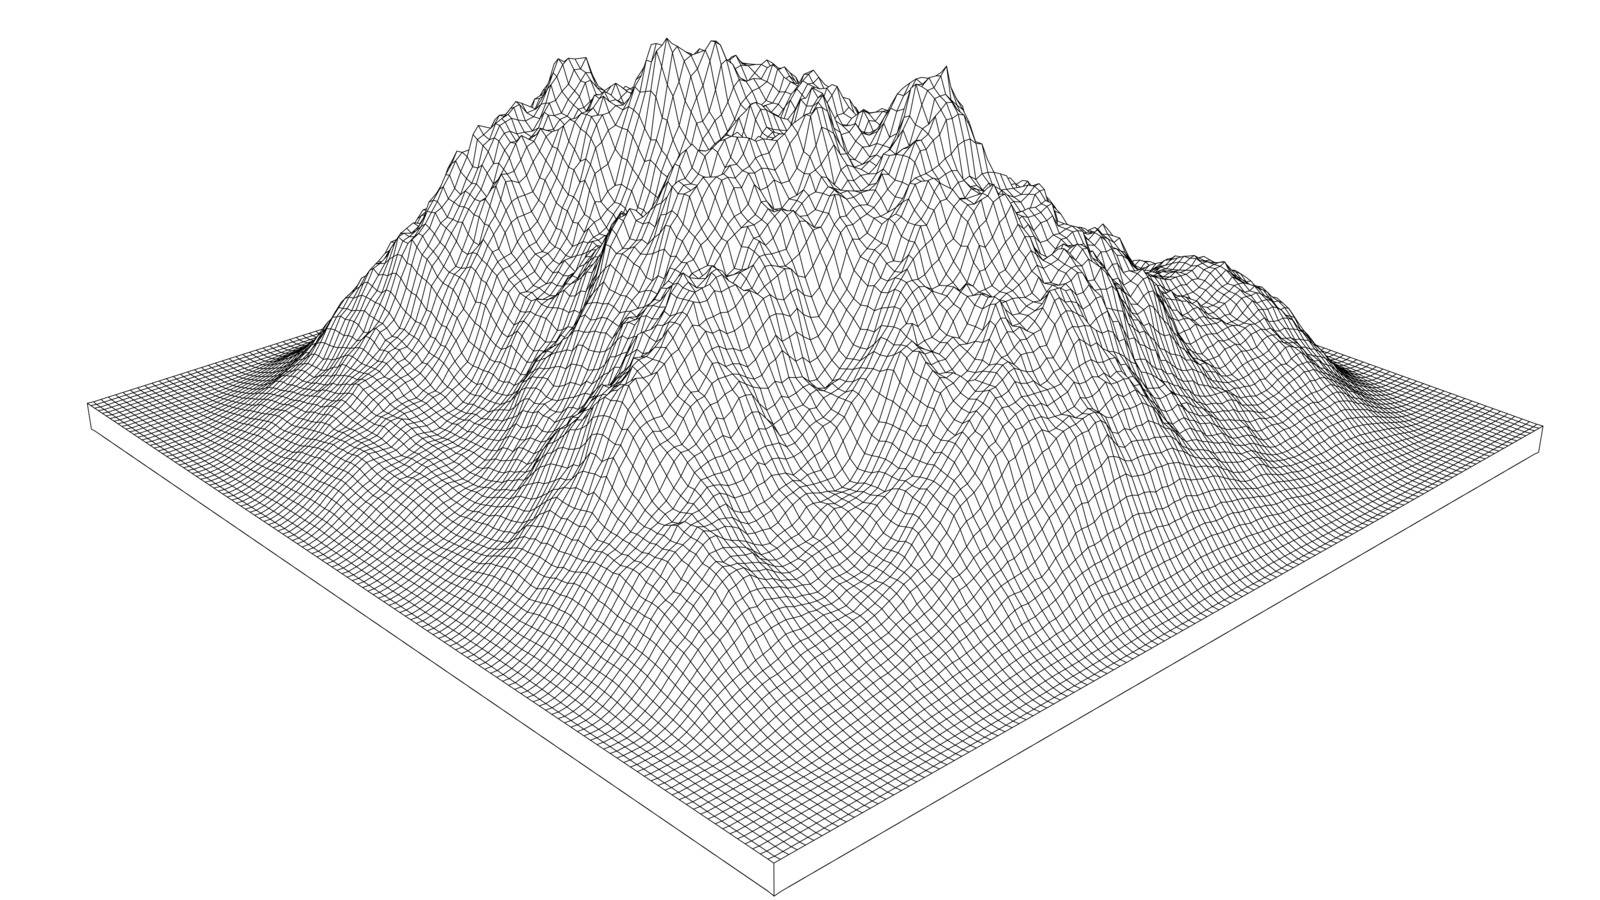 Curve lines in shape of part of mountain range by cherezoff